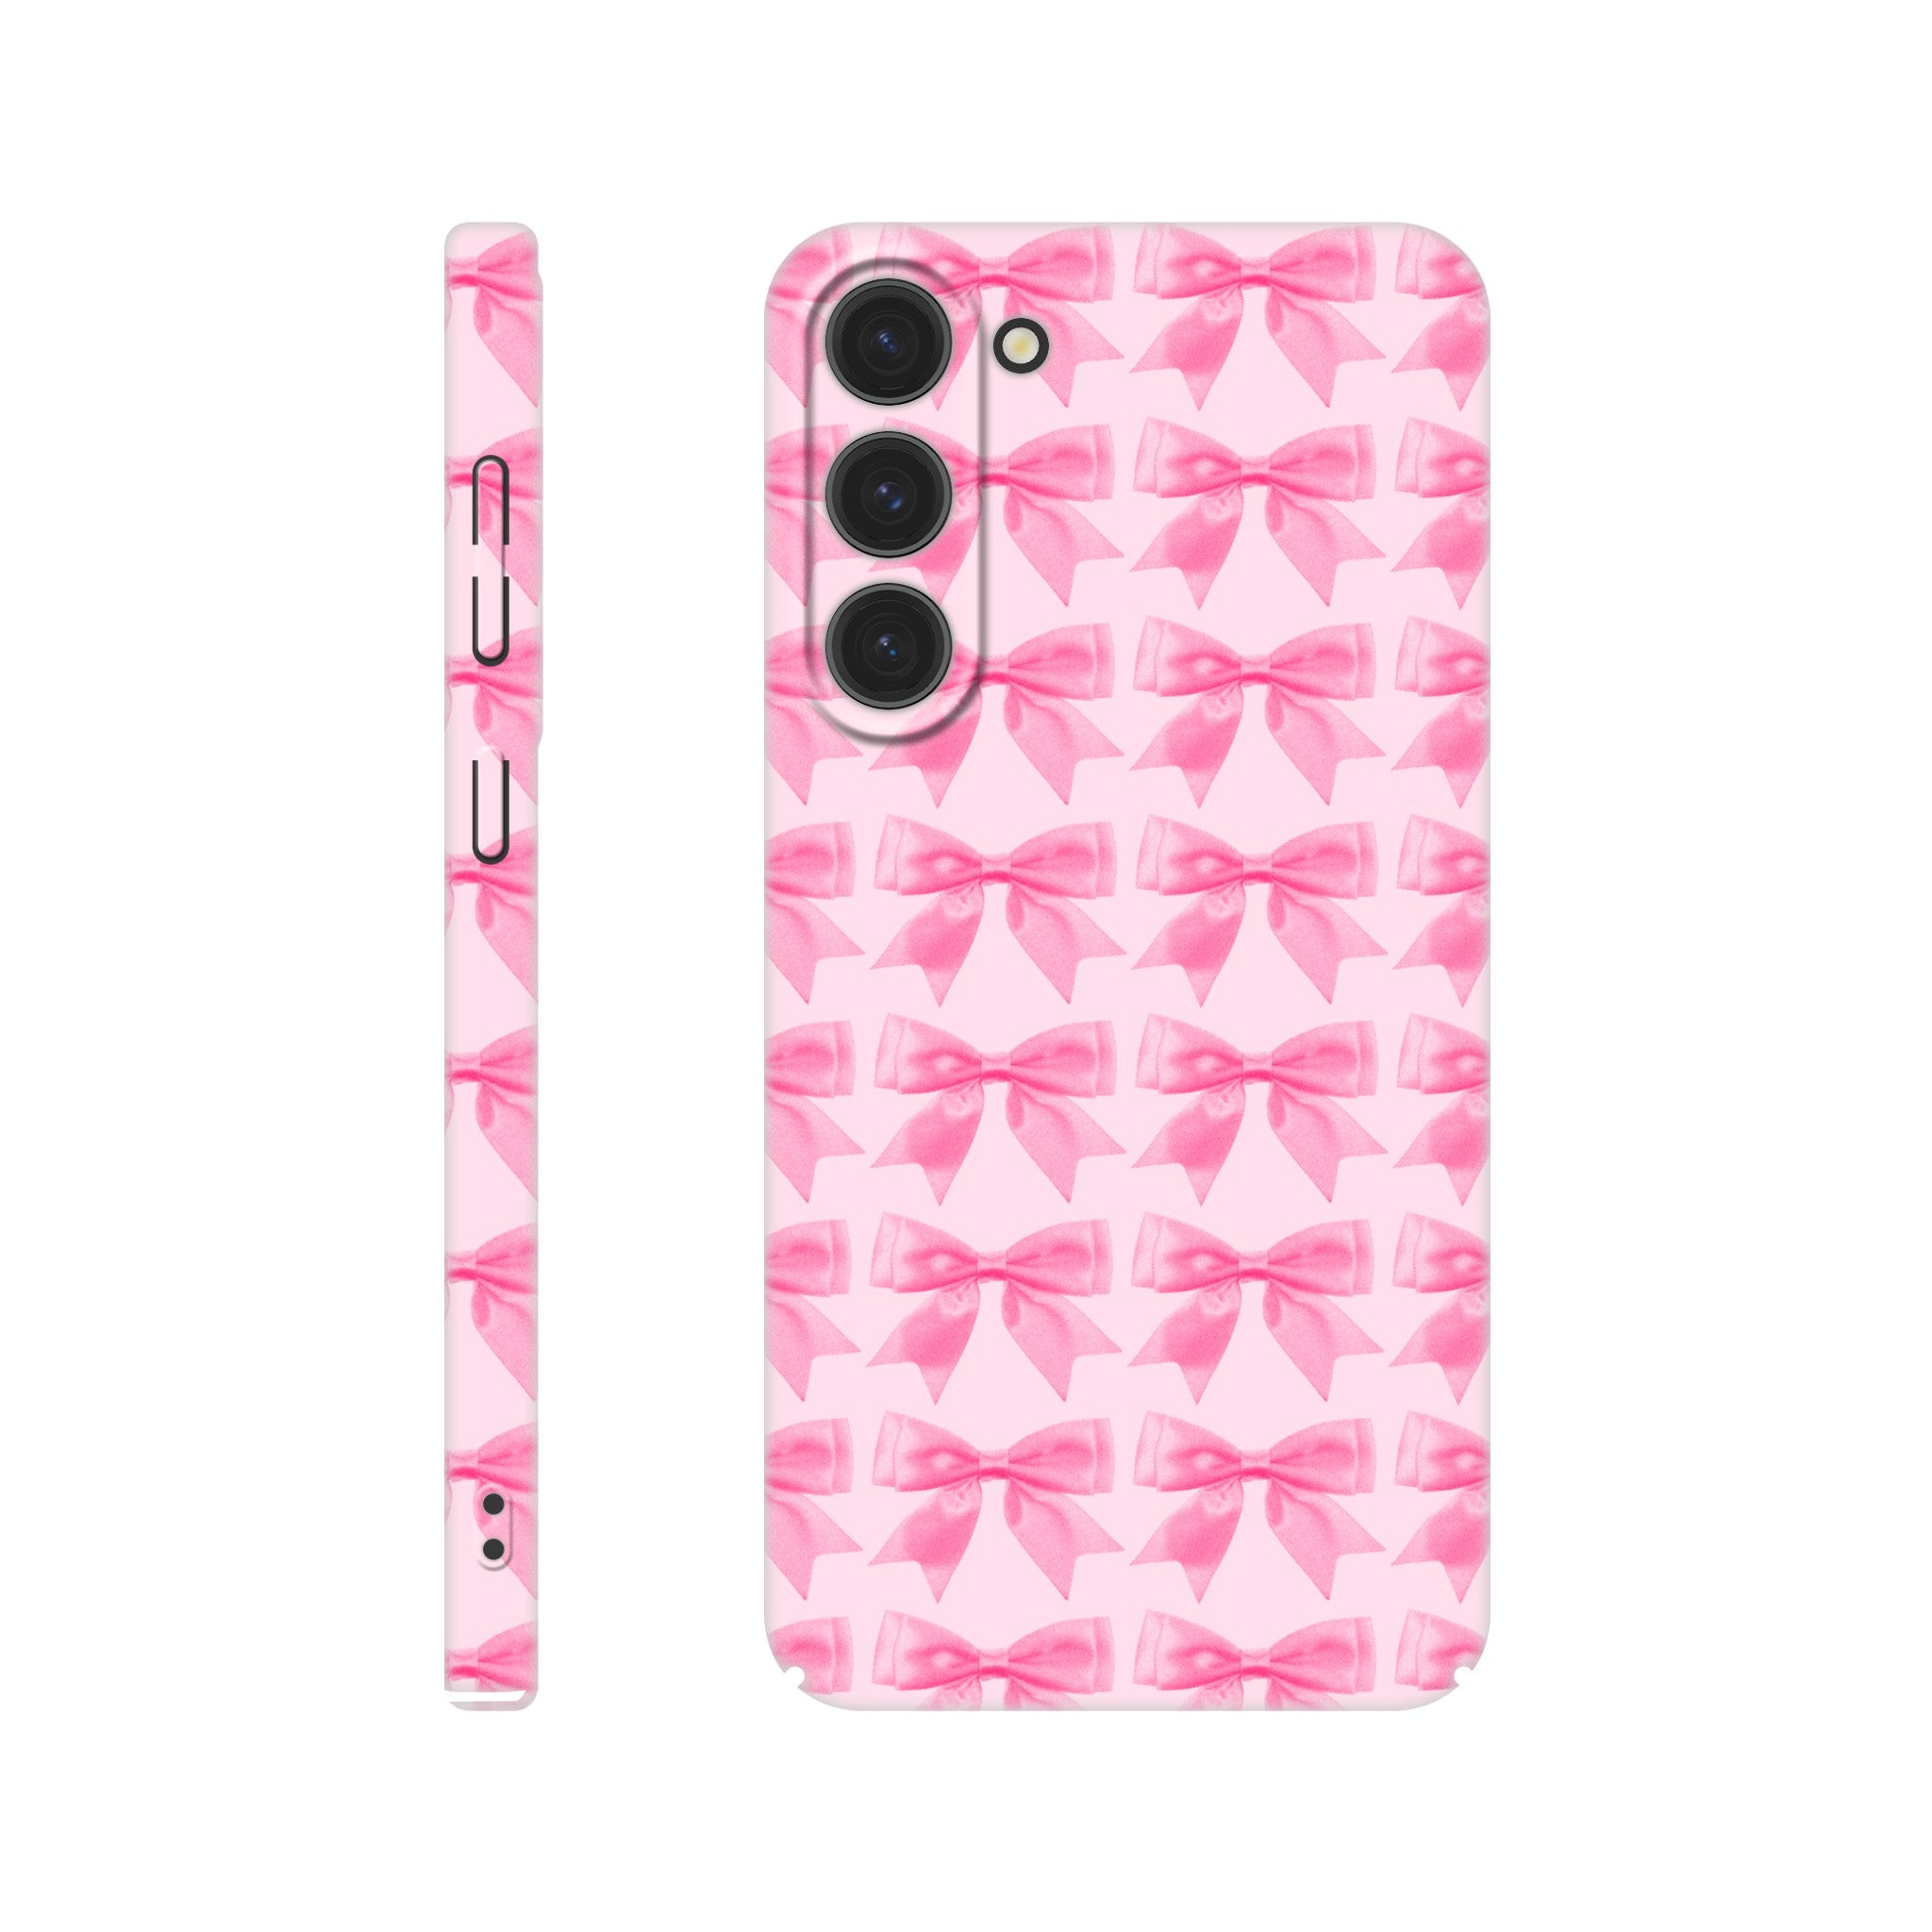 'Put a Bow On It' phone case - In Print We Trust